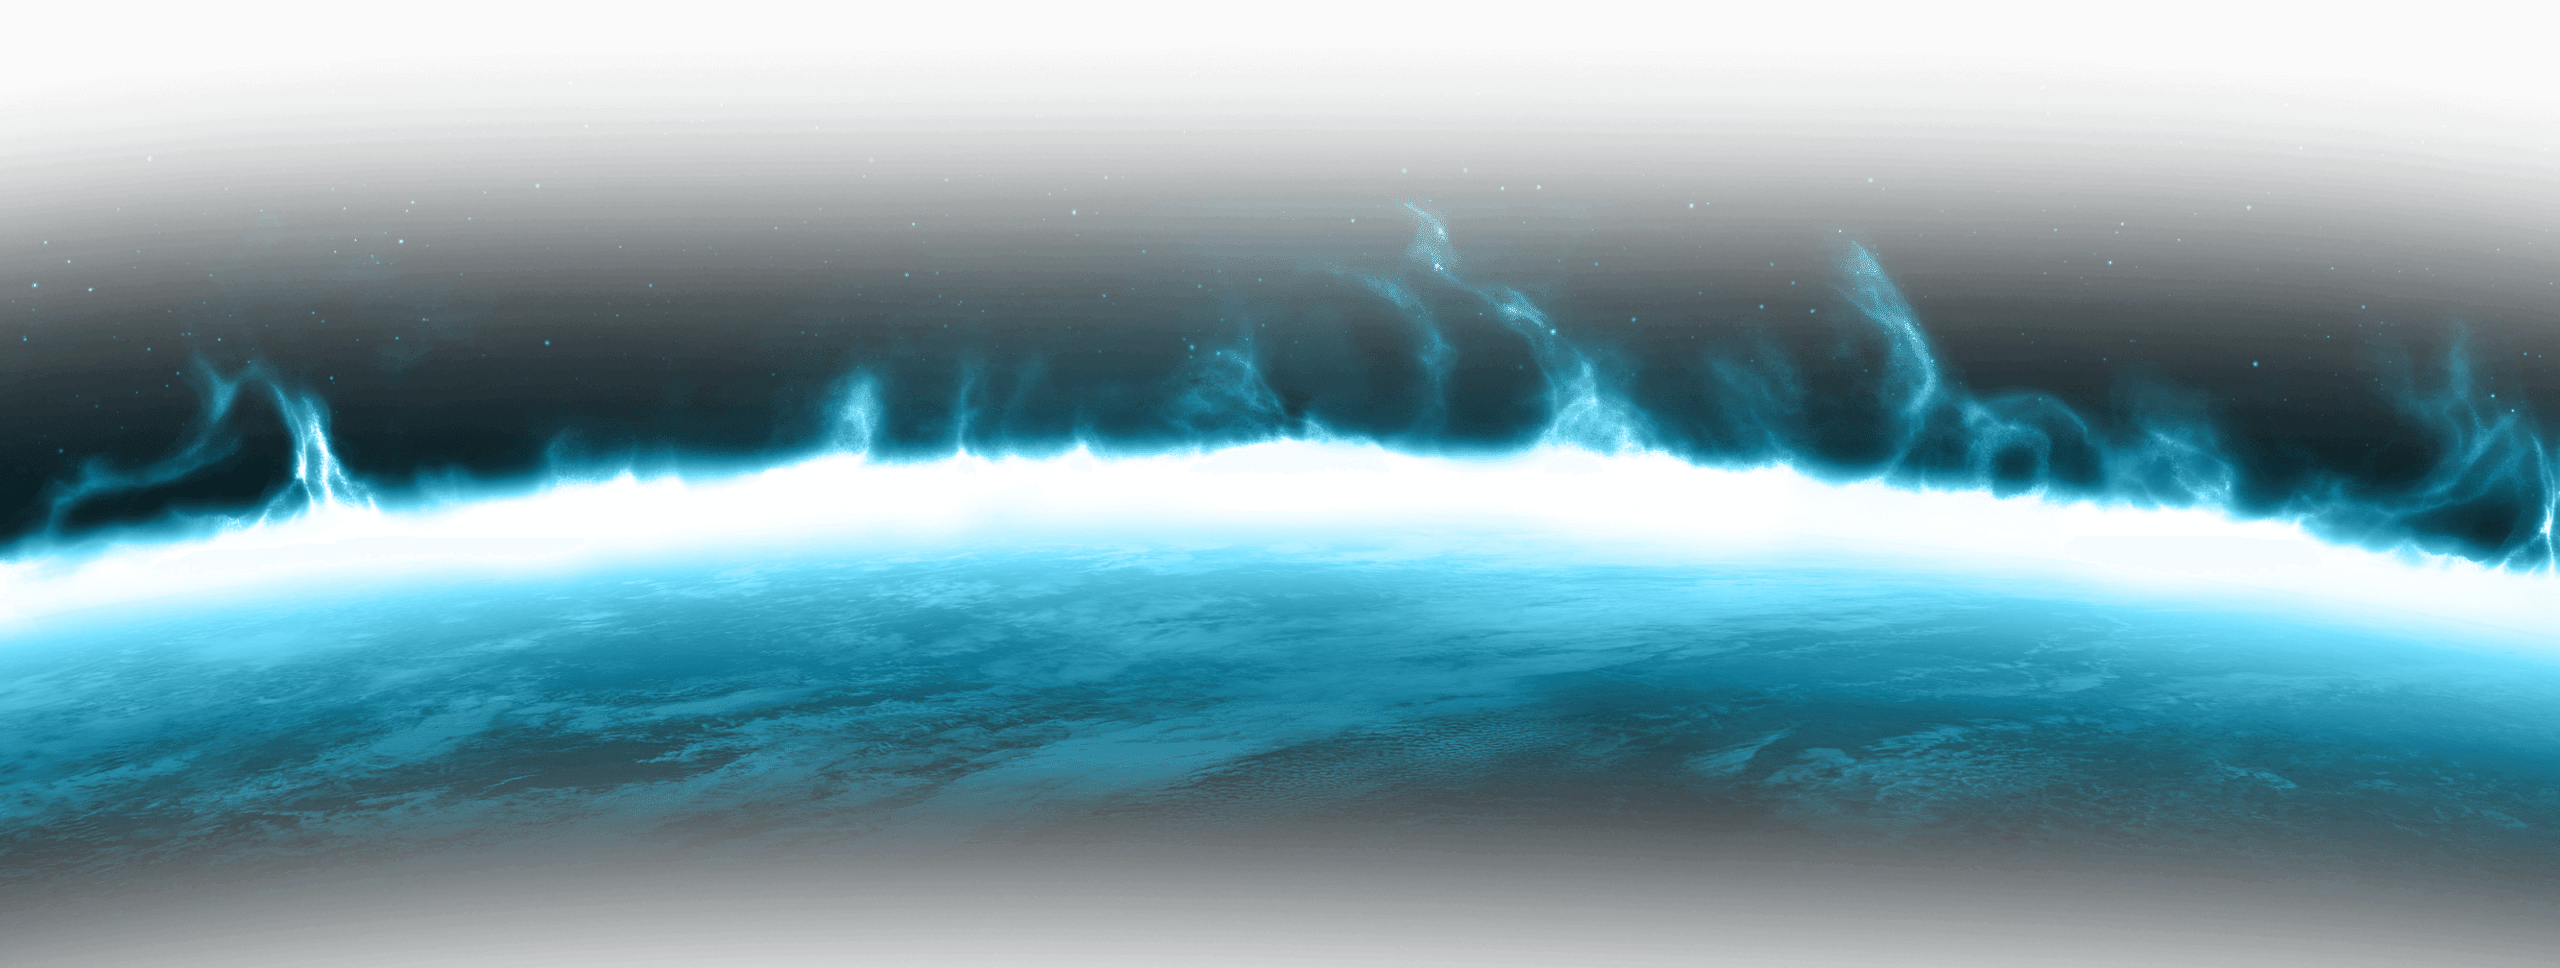 blue earth surrounded by blue flames